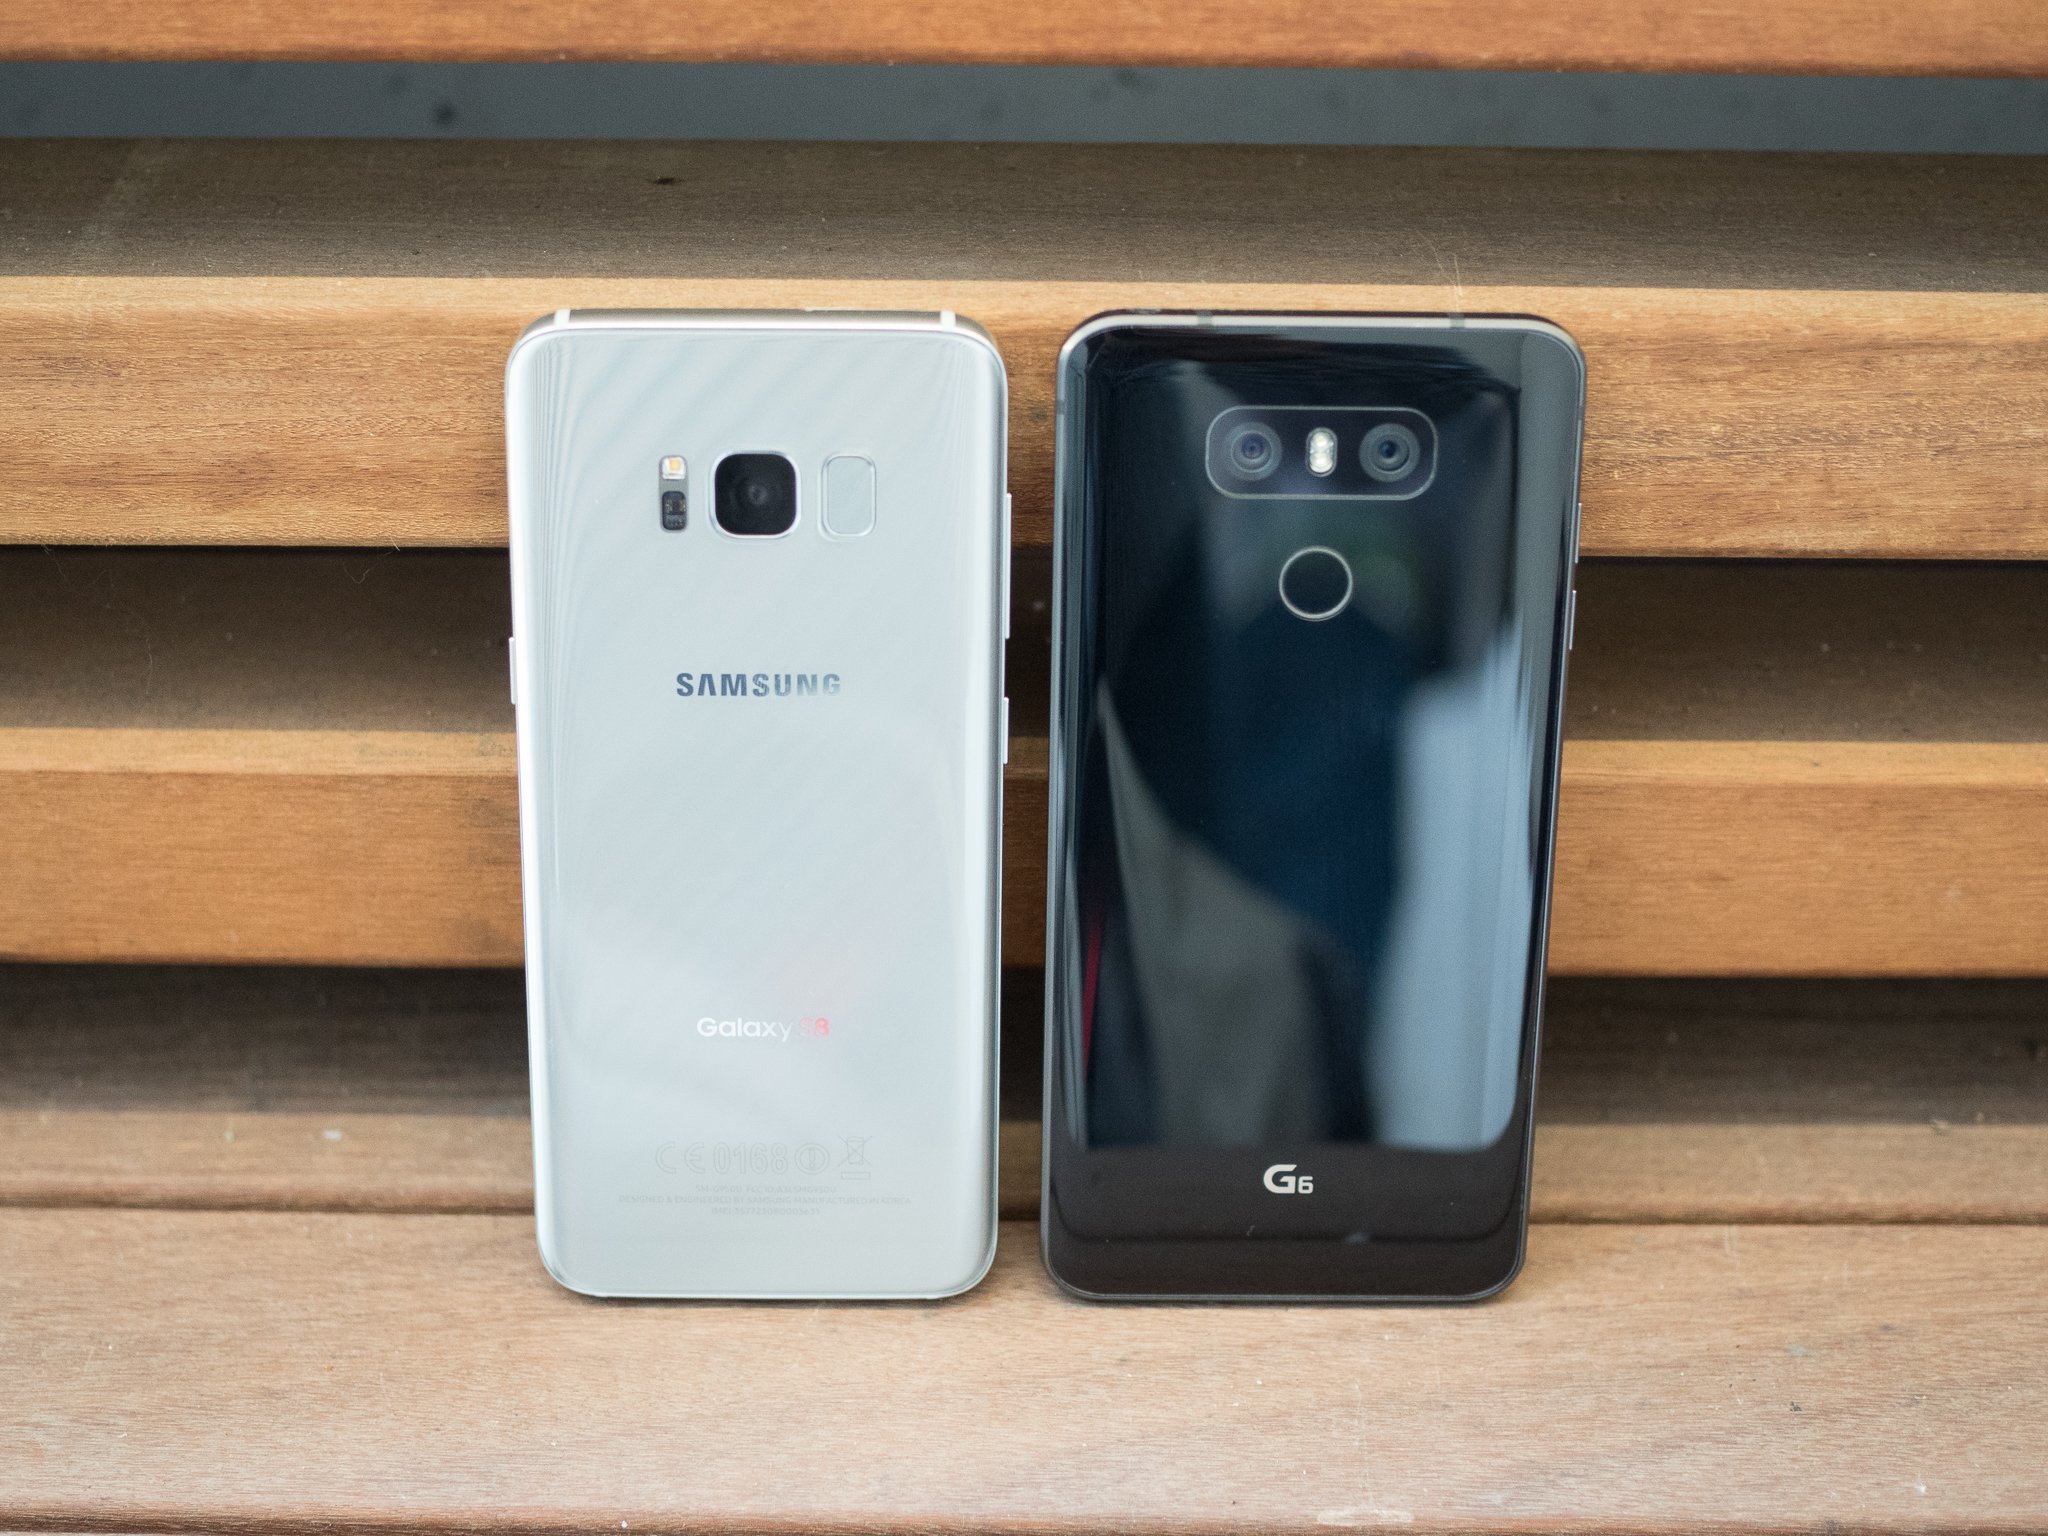 Galaxy S8 and LG G6